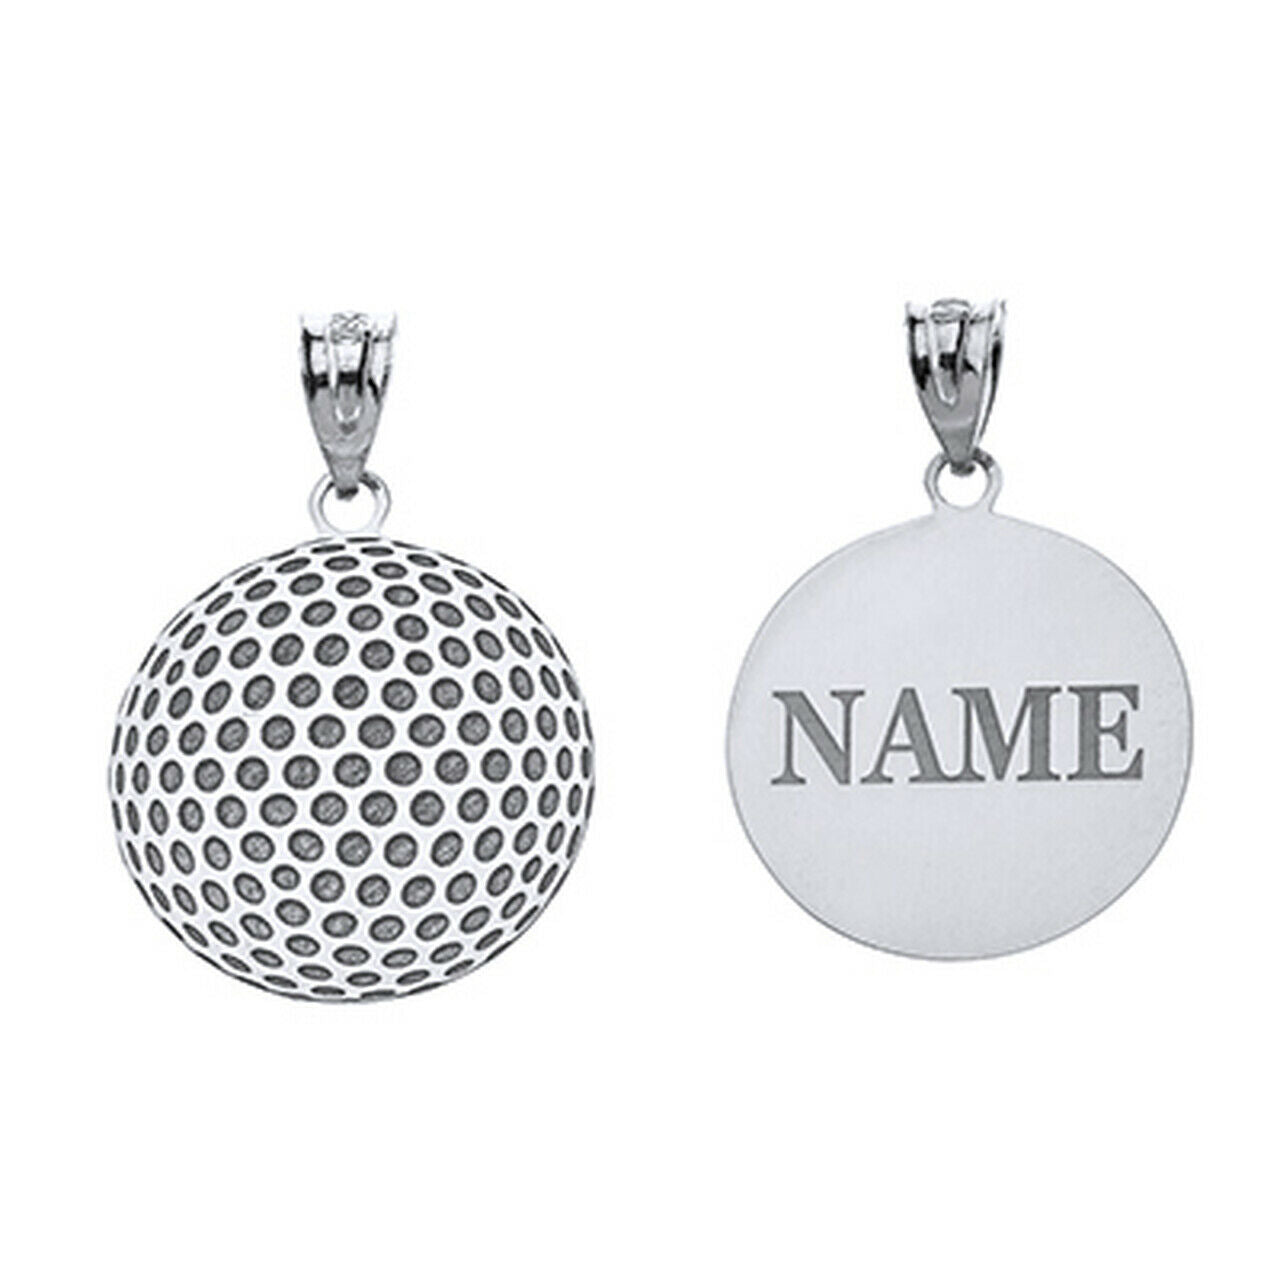 Personalized Sterling Silver Golf Ball Pendant Necklace - Engravable Your Name